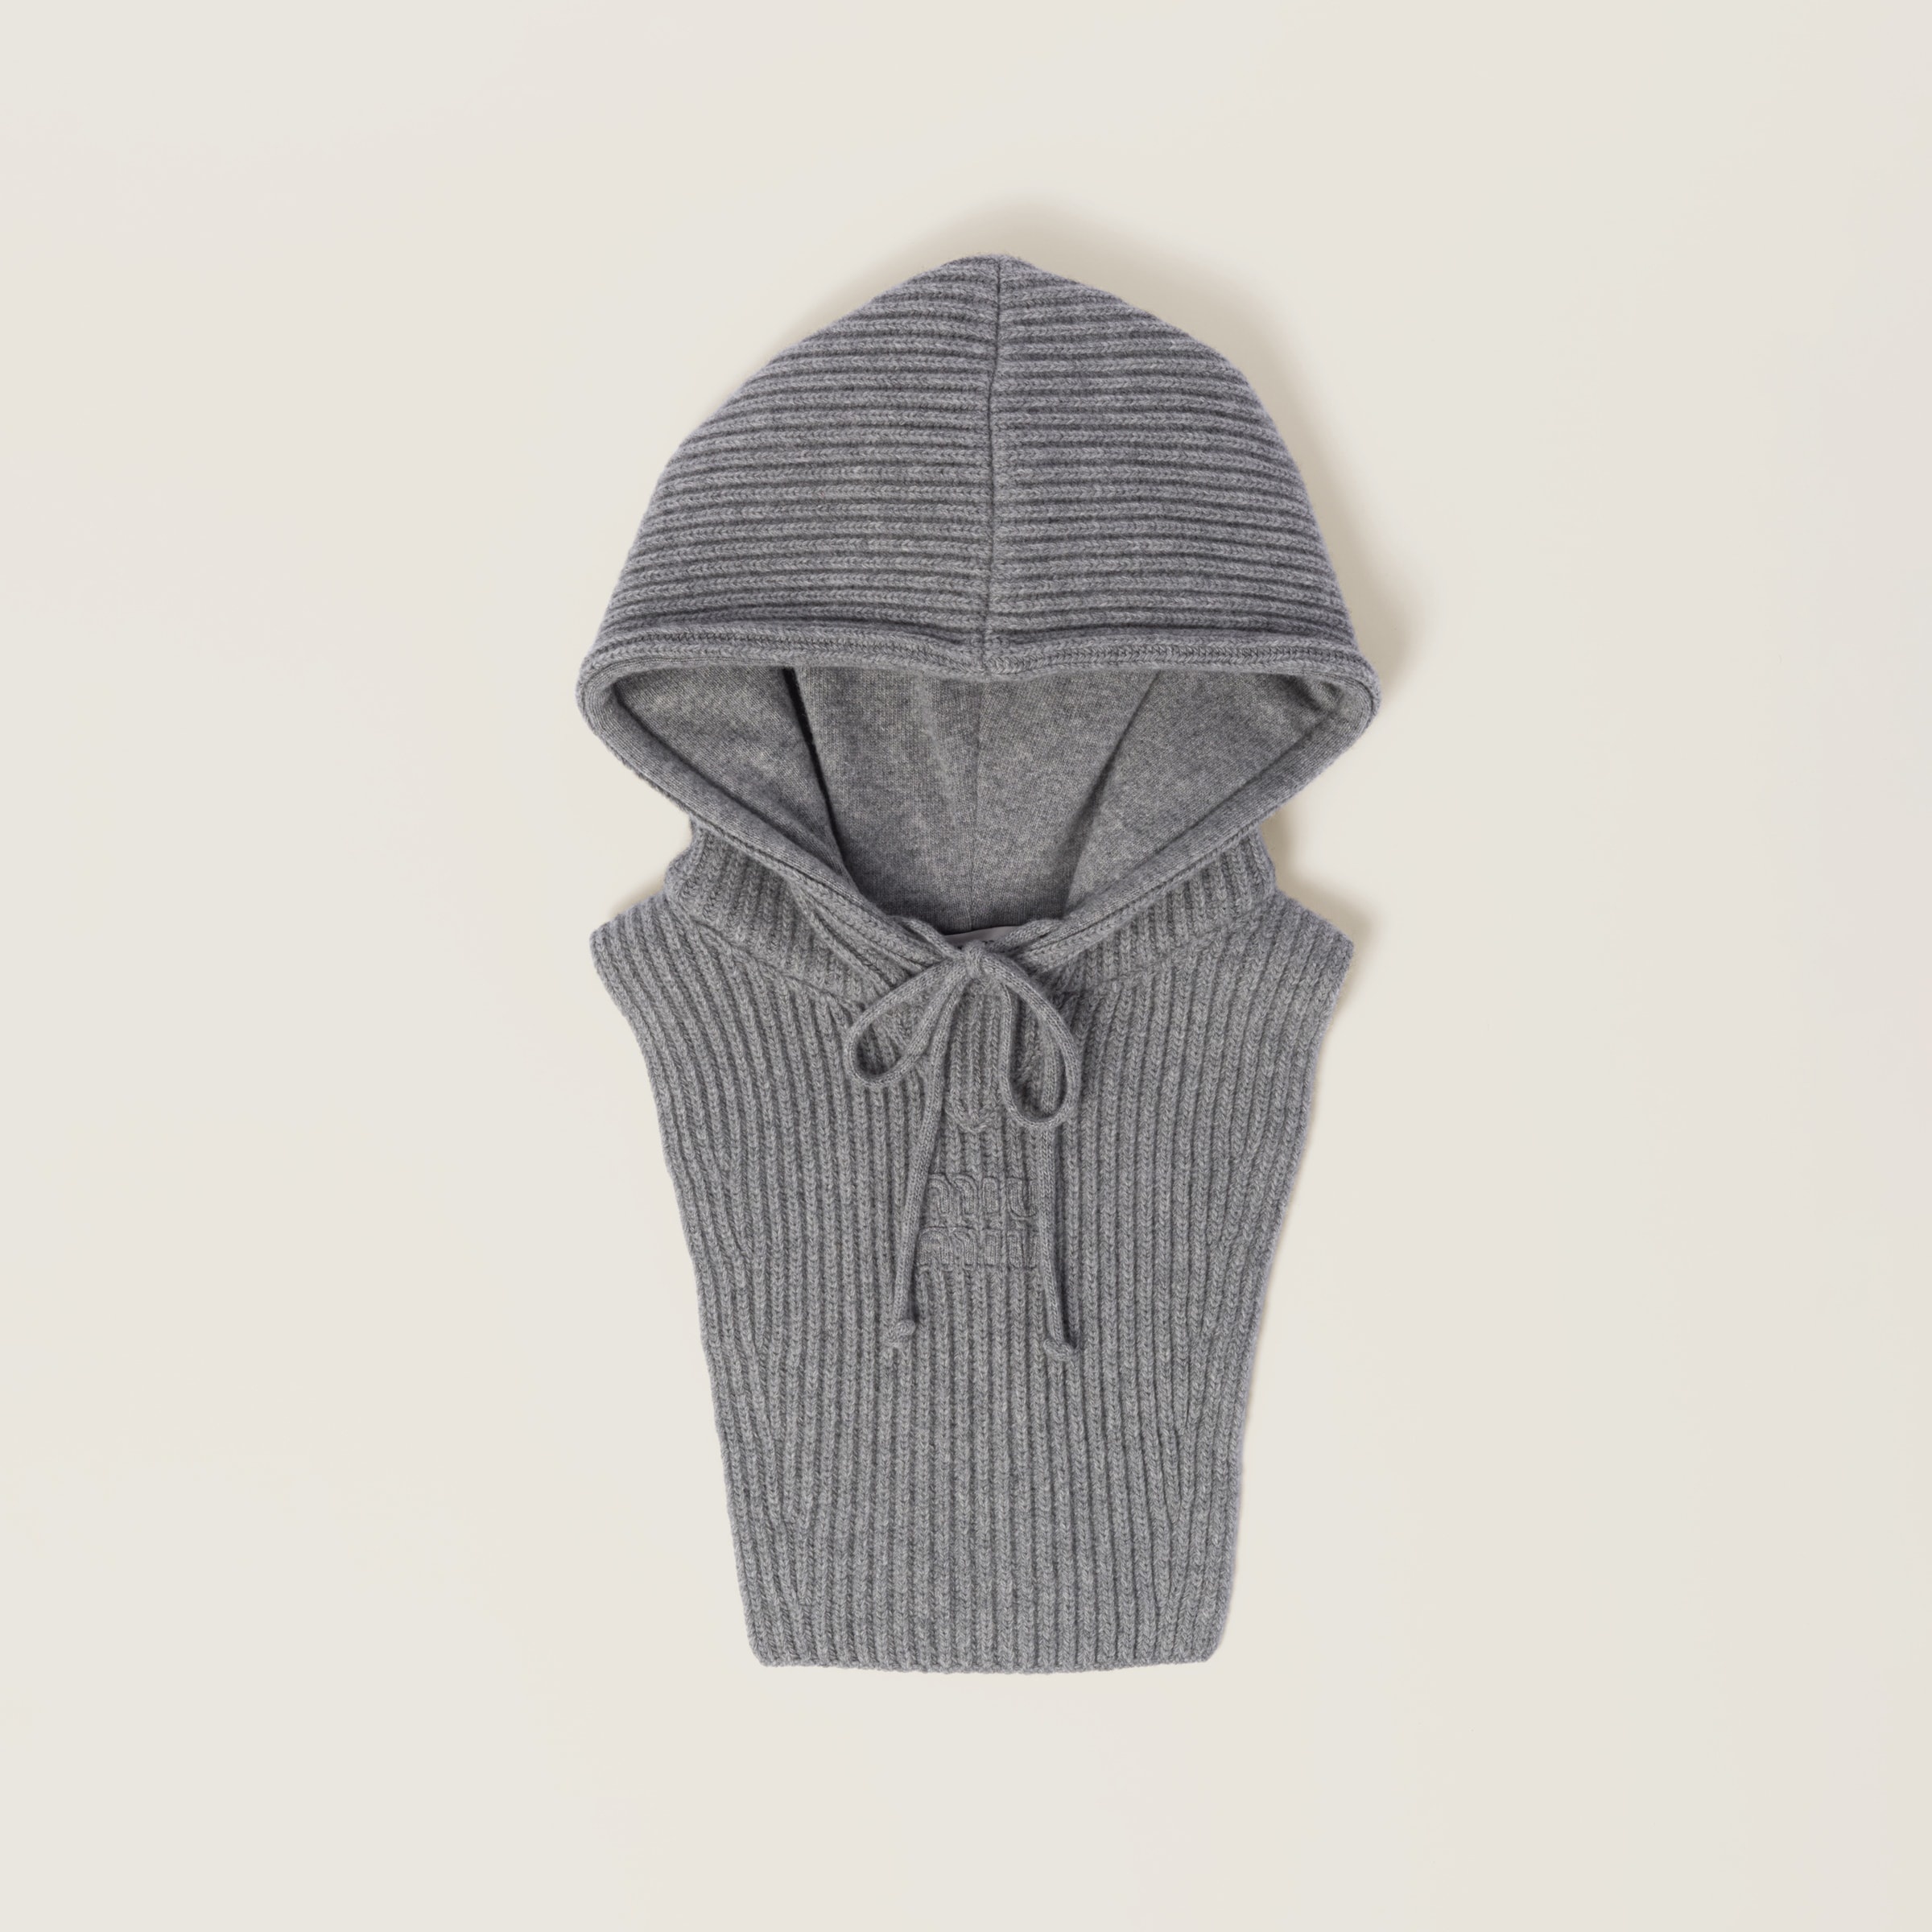 Wool and cashmere knit hoodie dickey - 1